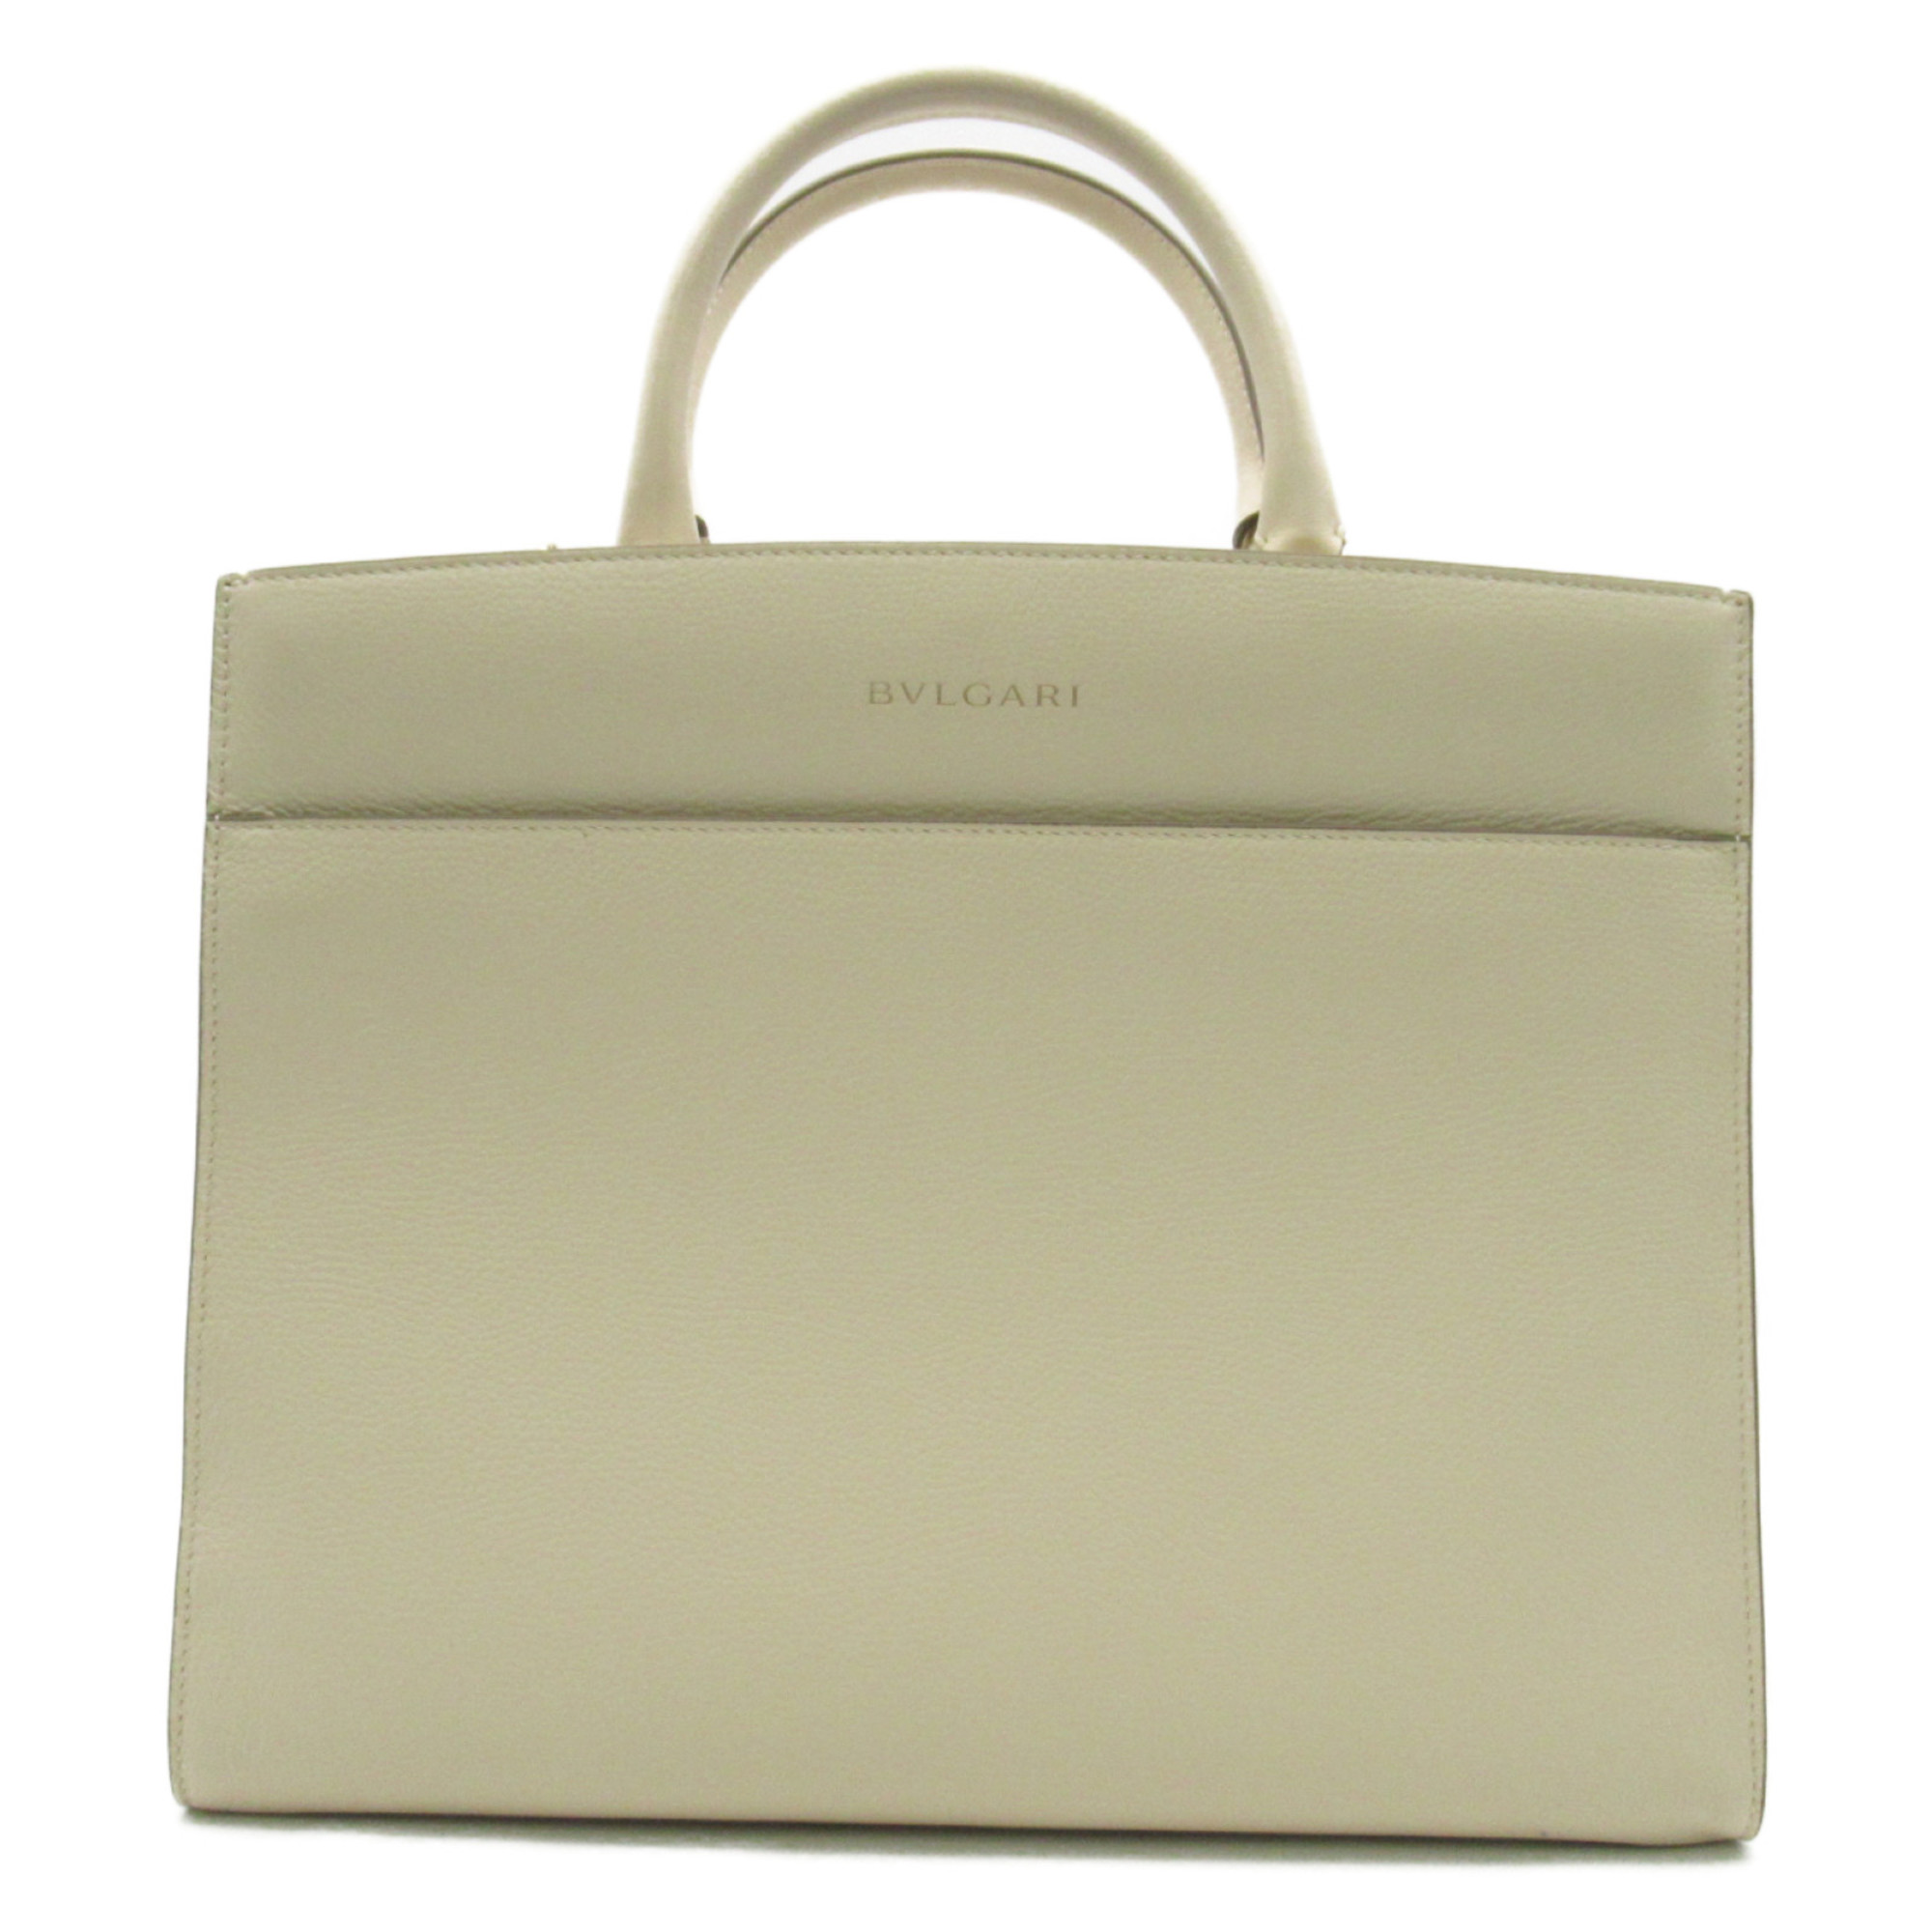 BVLGARI 2-way tote Other cream leather